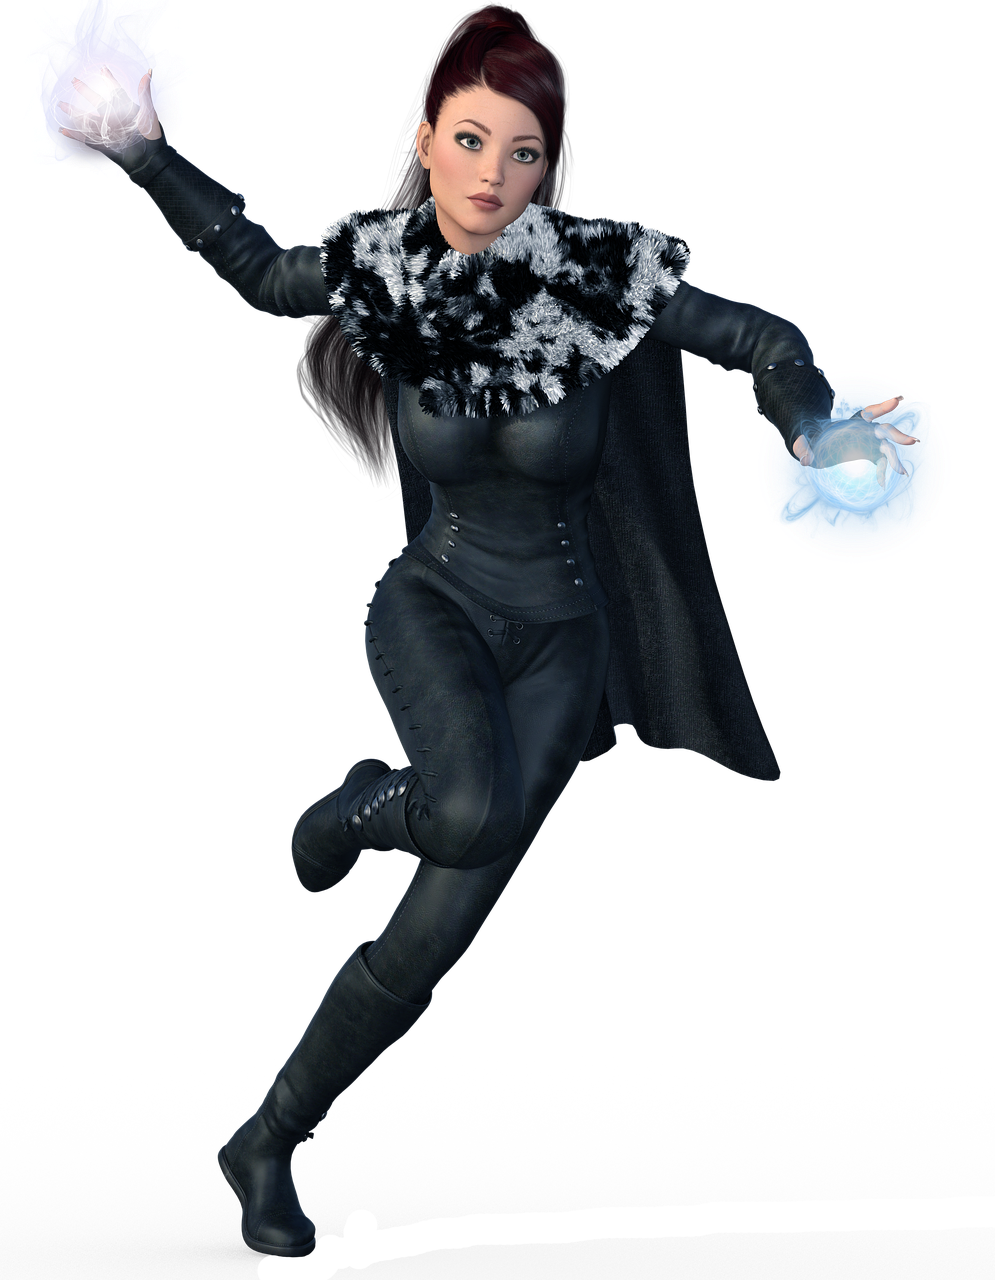 a woman flying through the air holding a frisbee, a character portrait, inspired by Valéria Dénes, zbrush central contest winner, black leather costume, holding a crystal ball, snow flurry, second life avatar